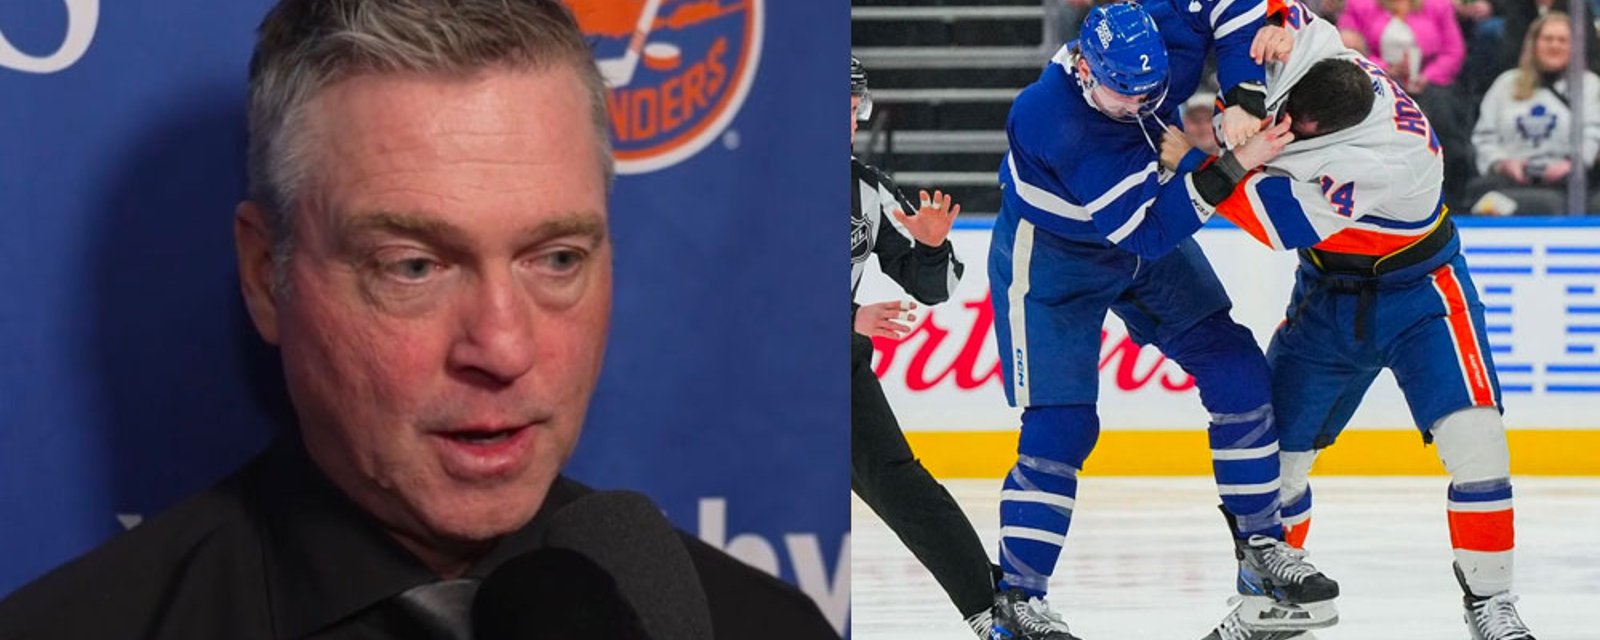 Patrick Roy has everyone in tears laughing with comments after beating Leafs